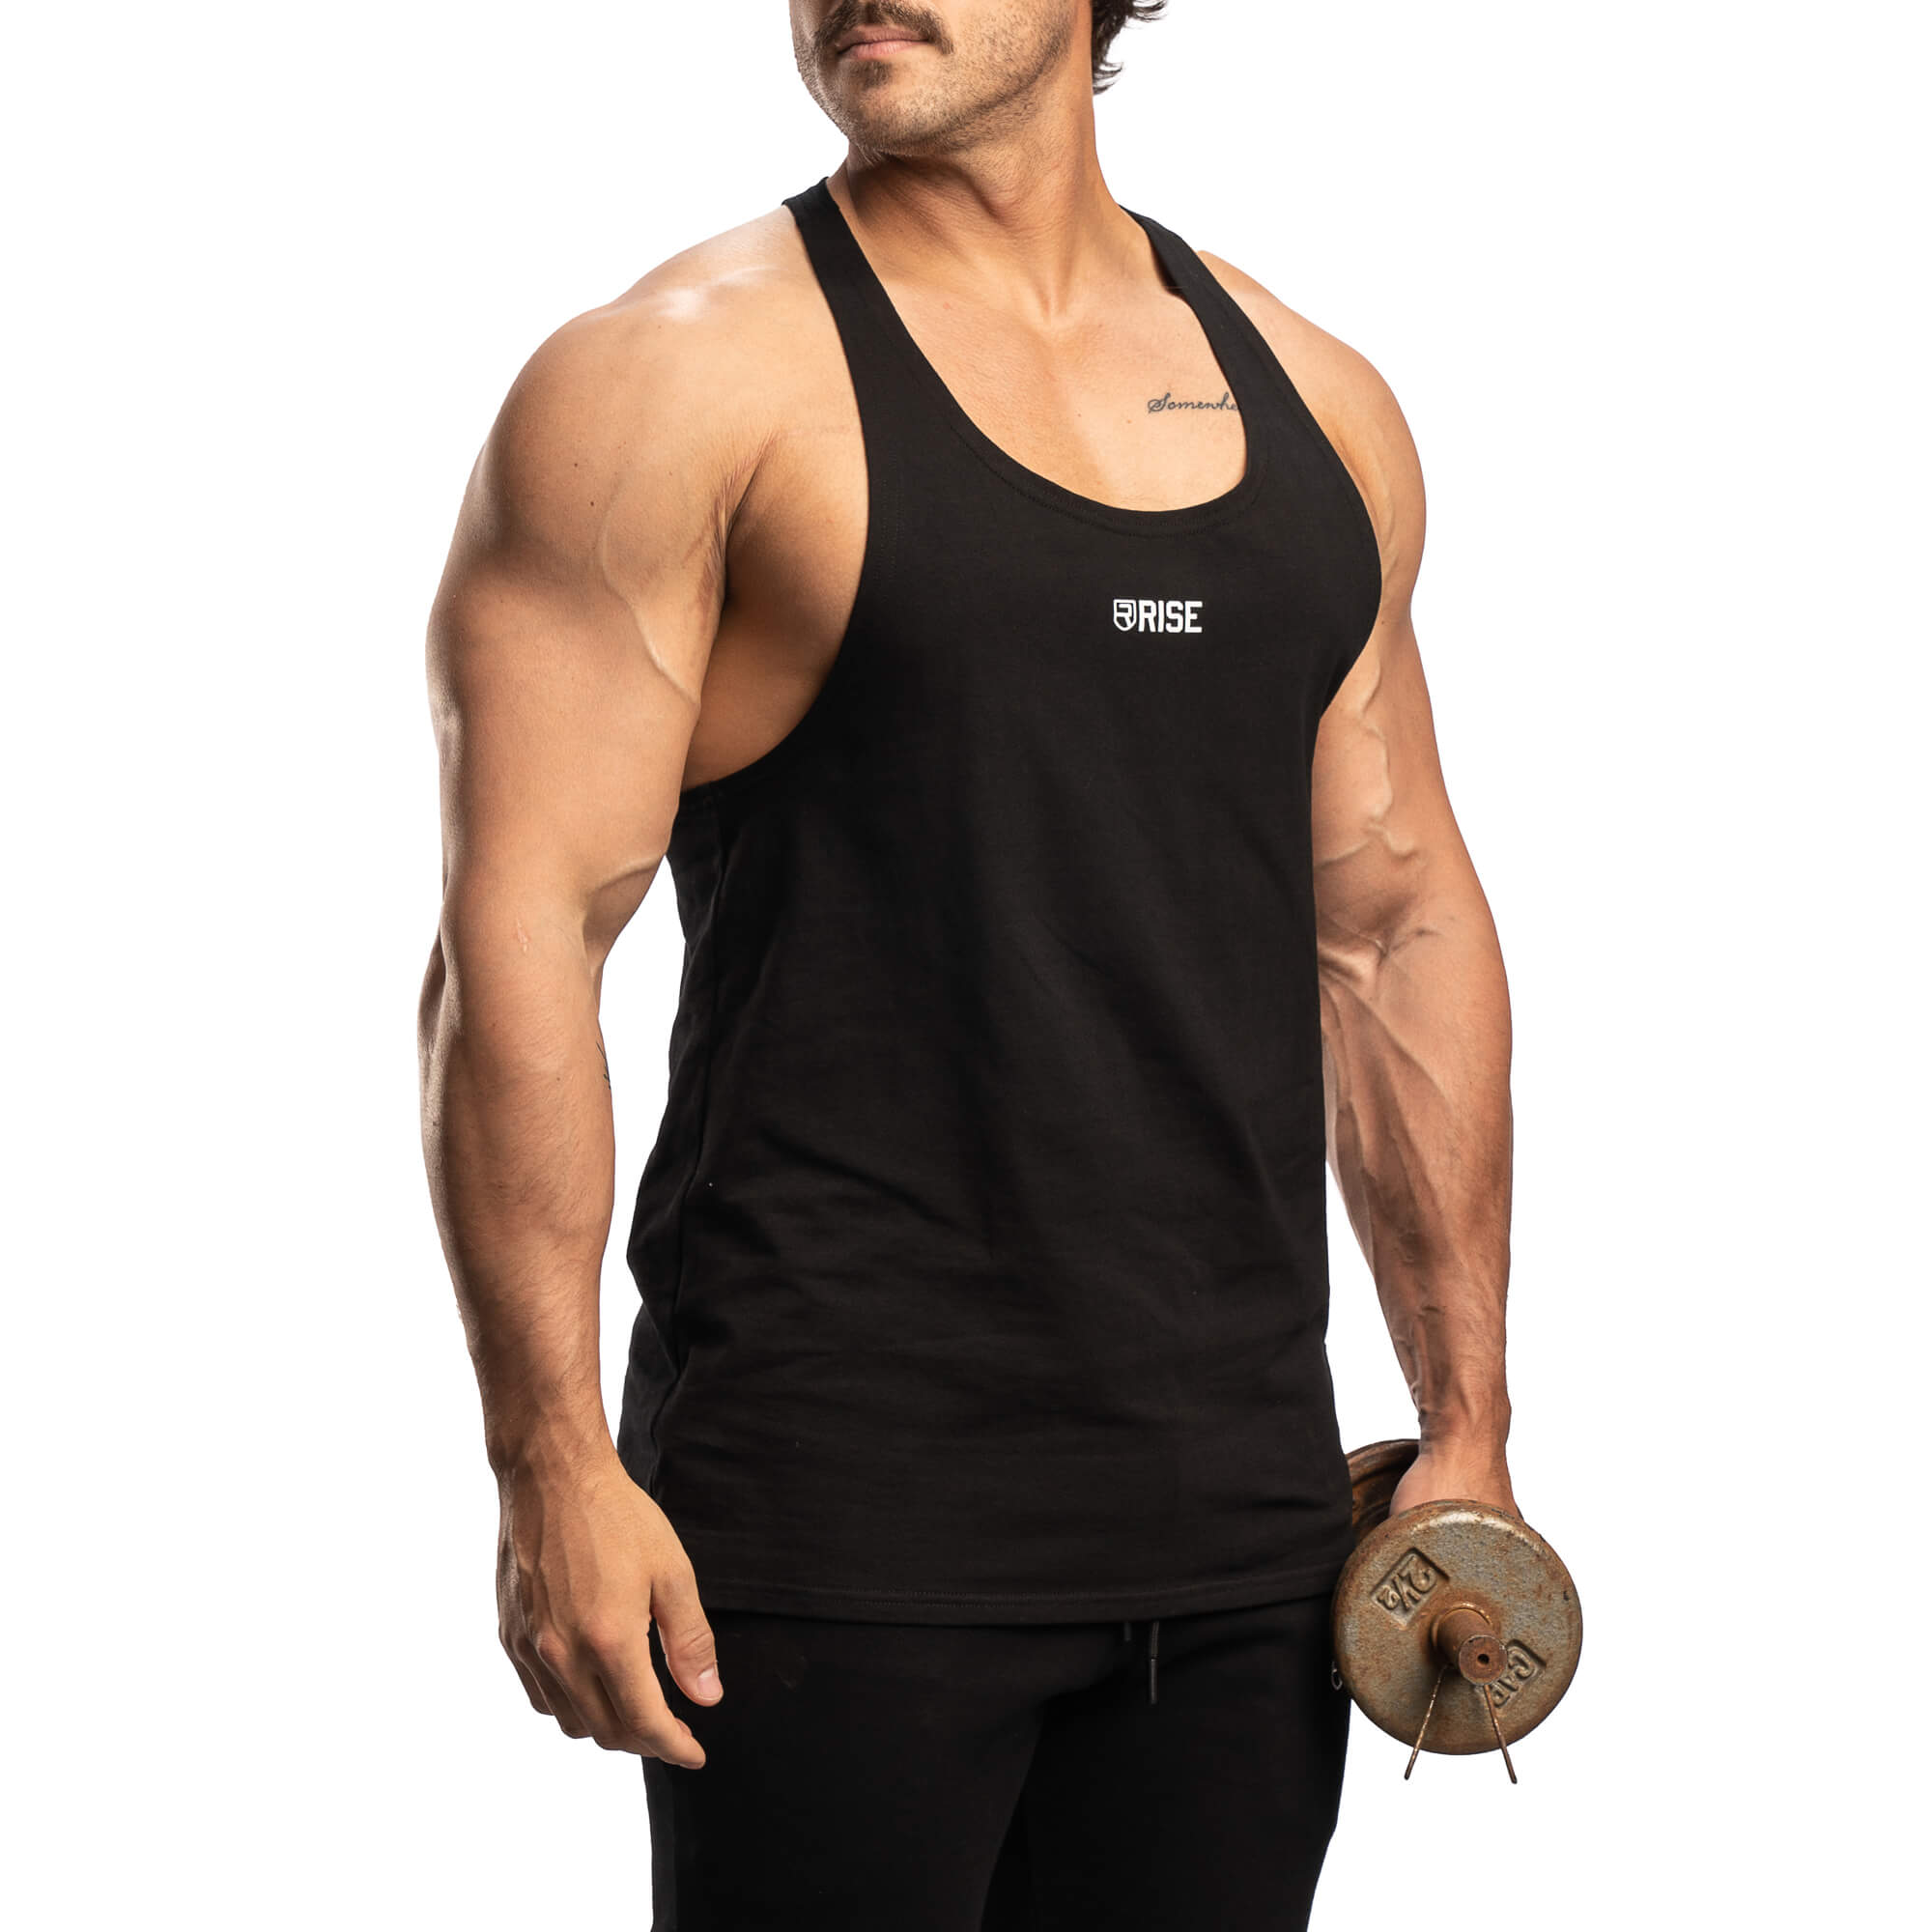 Gym Clothes - Leading Wholesale Women's Gym Wear Manufacturers In USA,  Australia, Canada, UK, Europe, UA Contact Us :   Gym Clothes being one of the leading wholesale women's gym wear  manufacturers